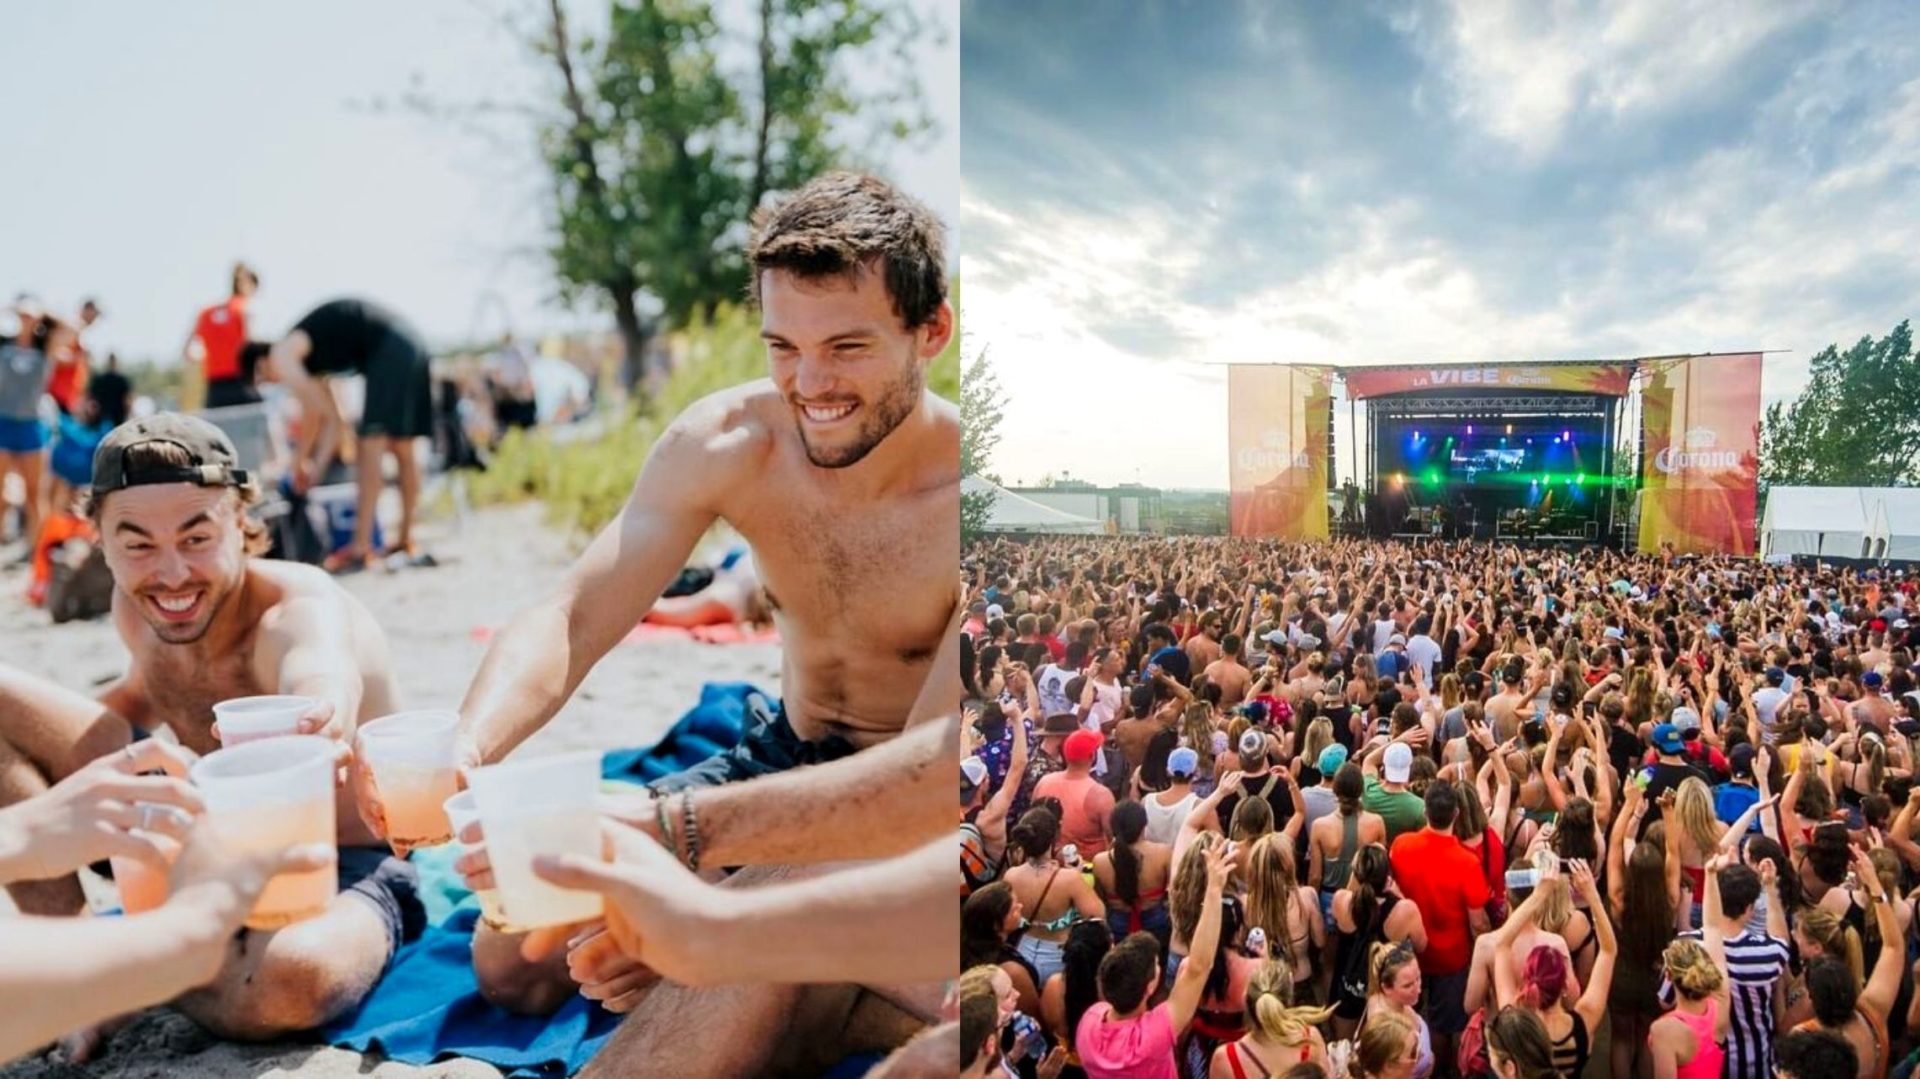 A new music and food festival is coming to Quebec Beach!